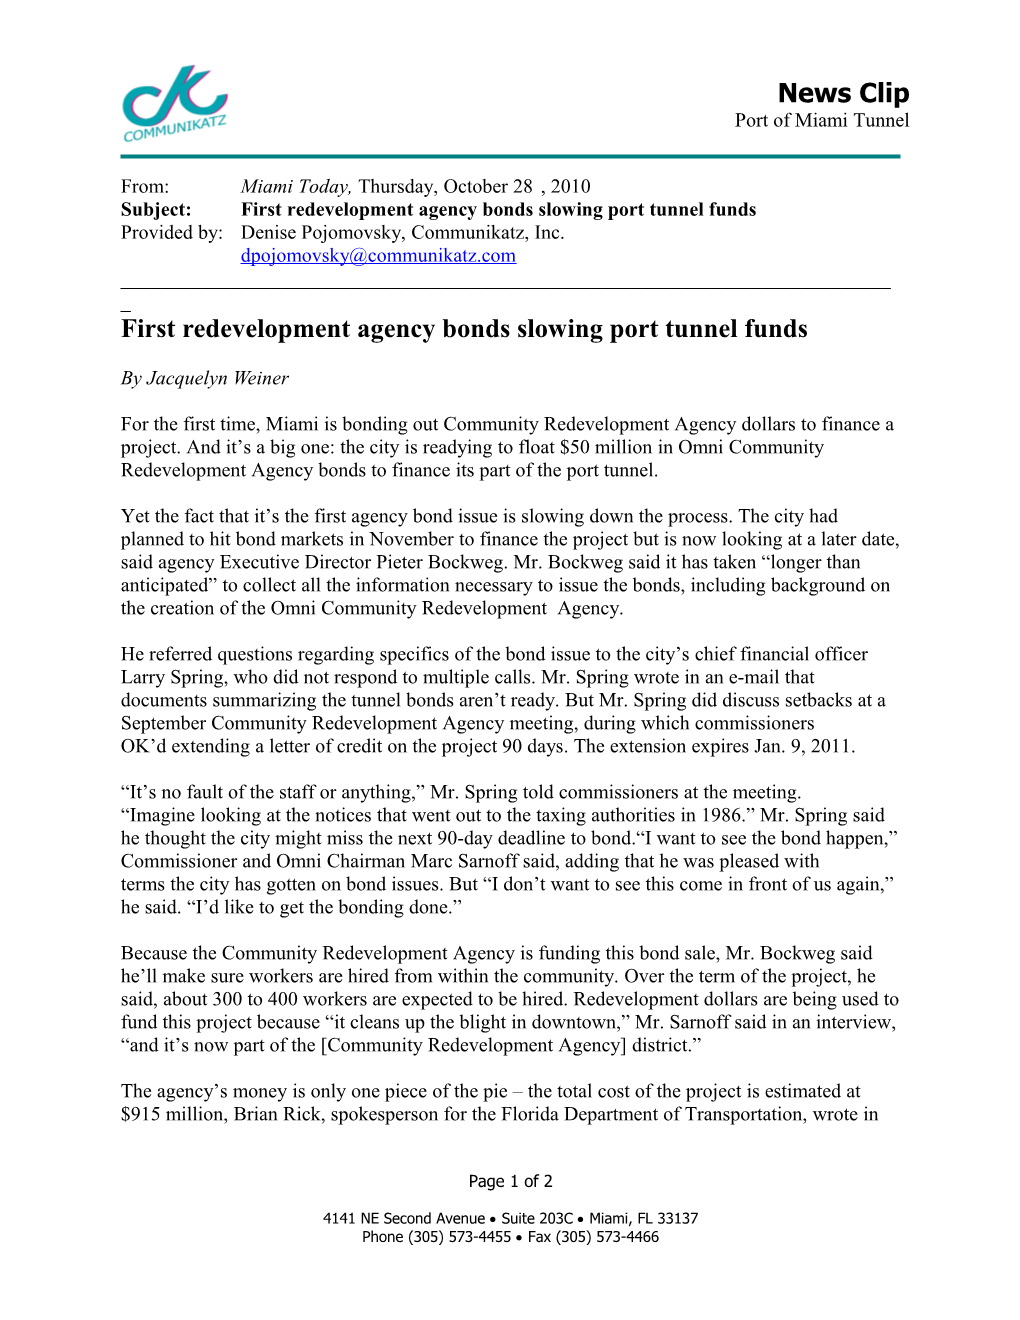 Subject: First Redevelopment Agency Bonds Slowing Port Tunnel Funds